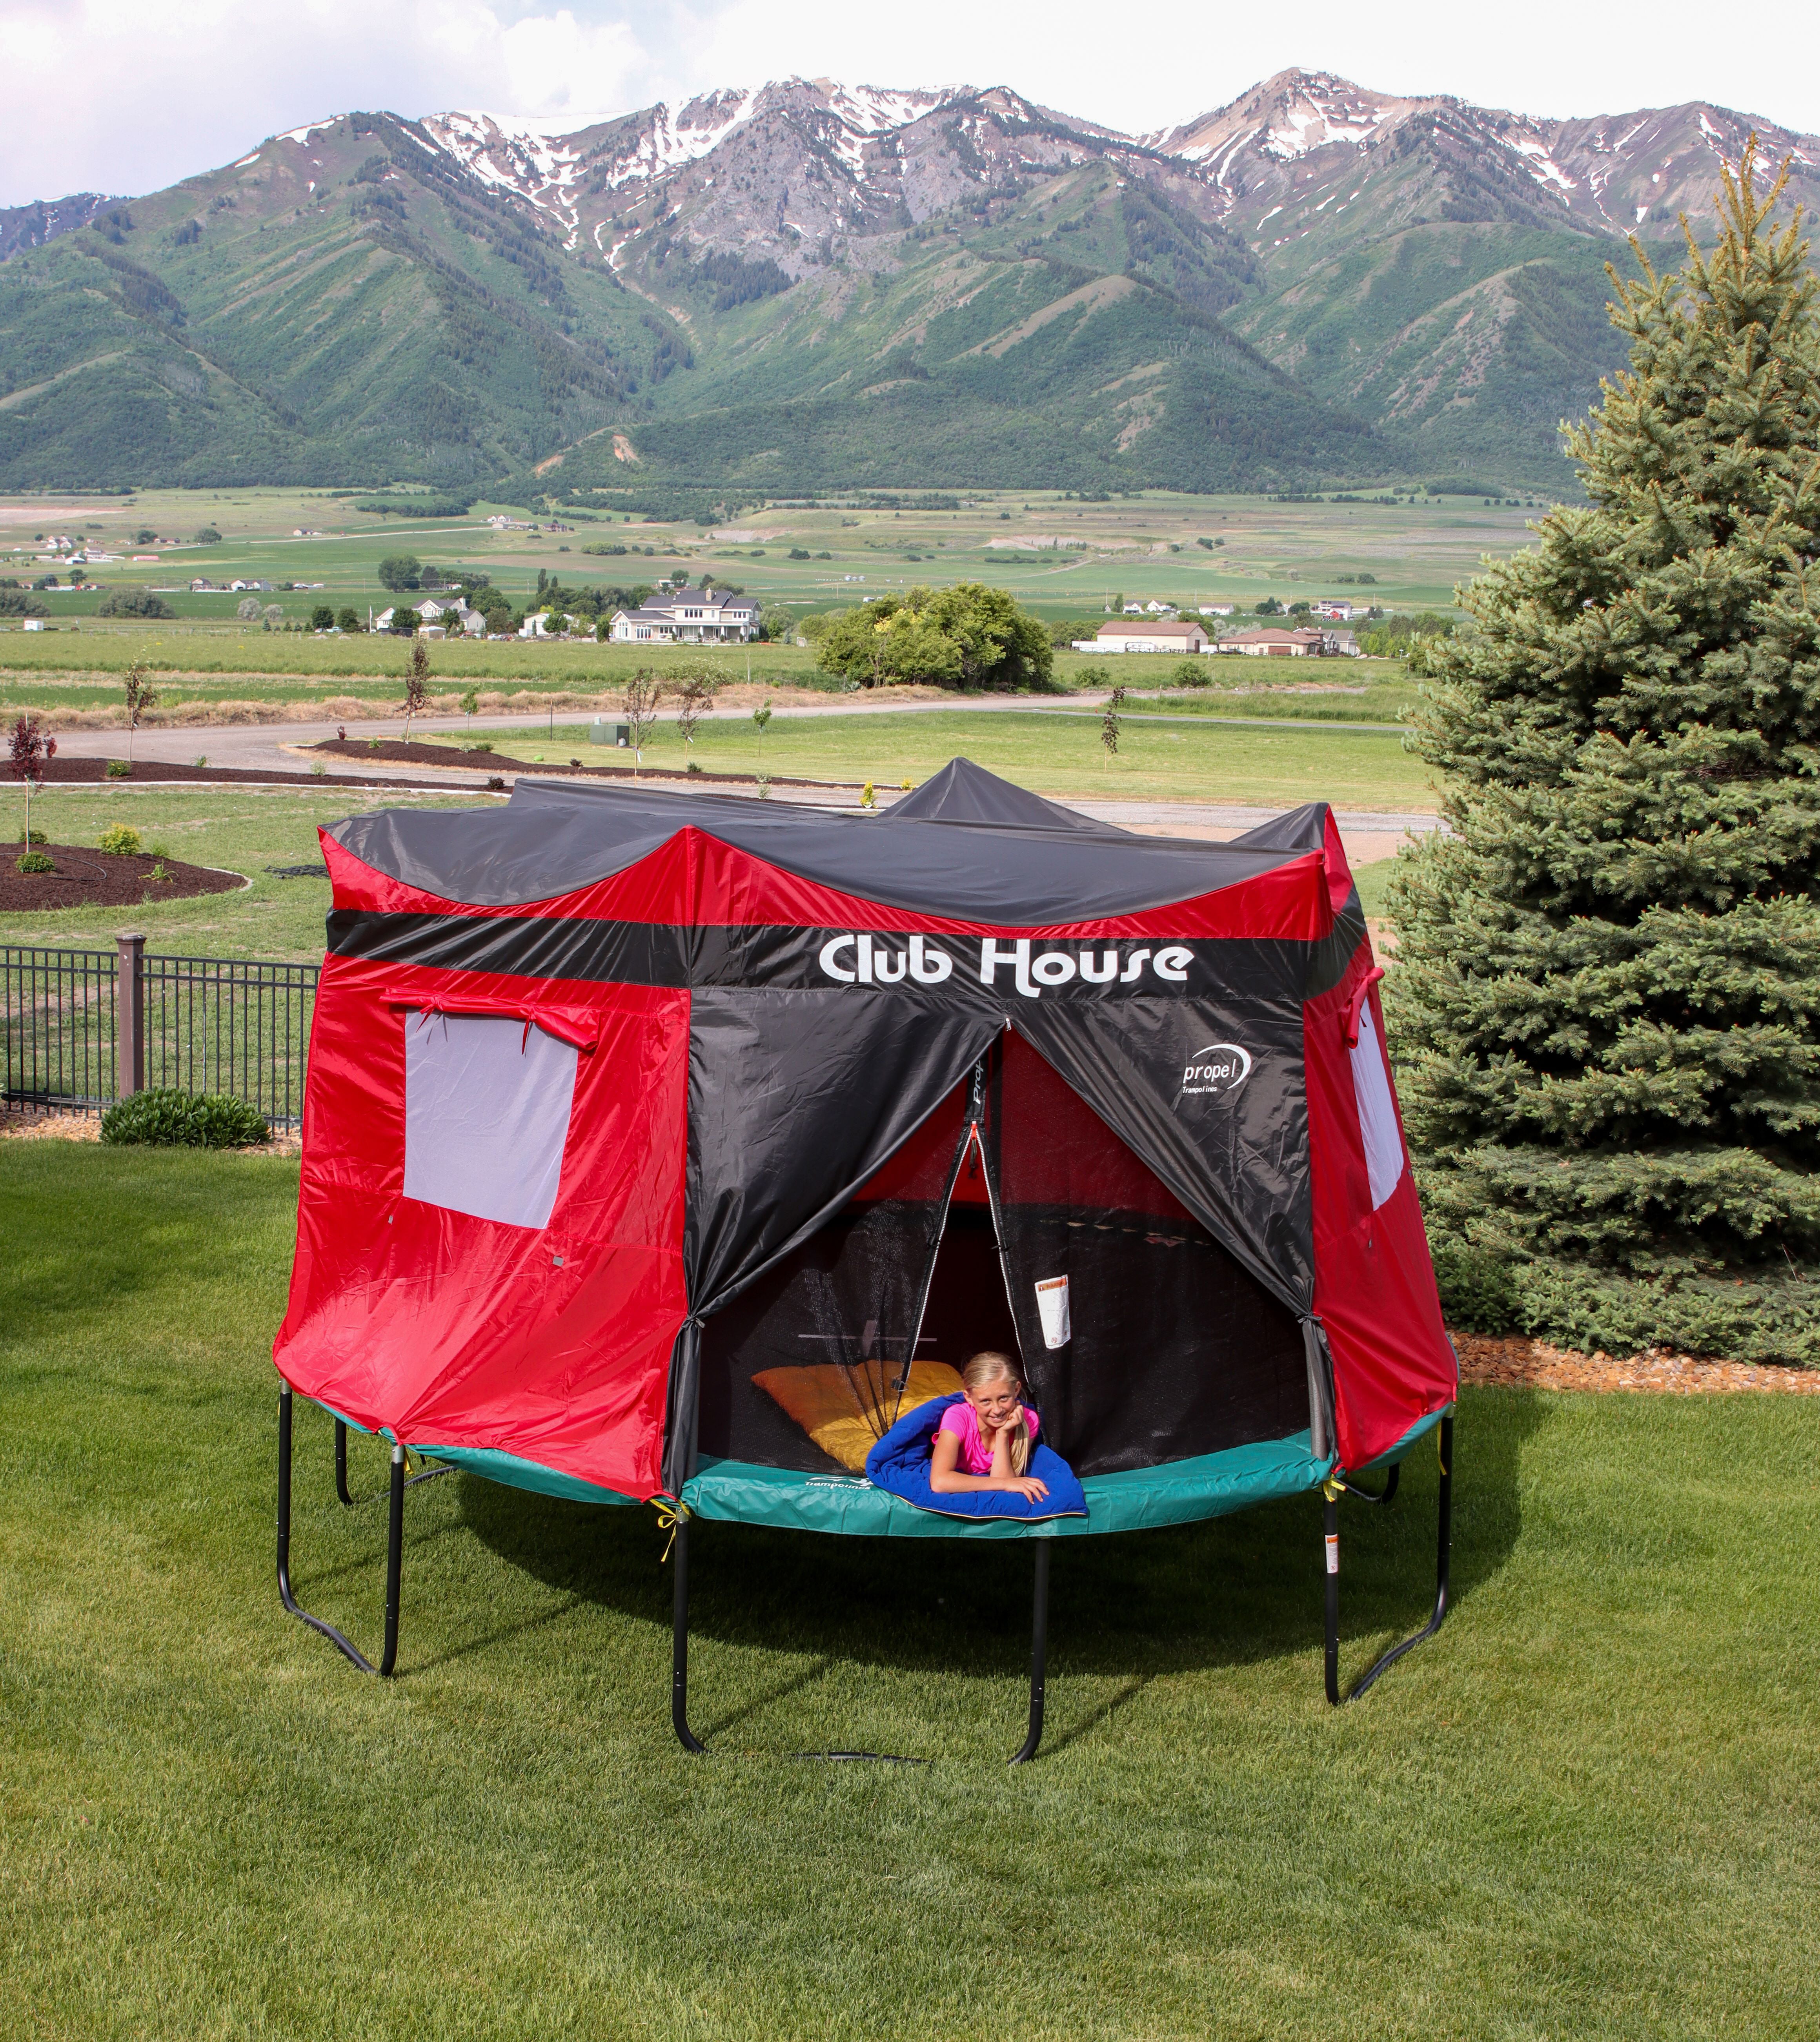 Trampolines 14' Red Clubhouse For (Trampoline not Included) - Walmart.com